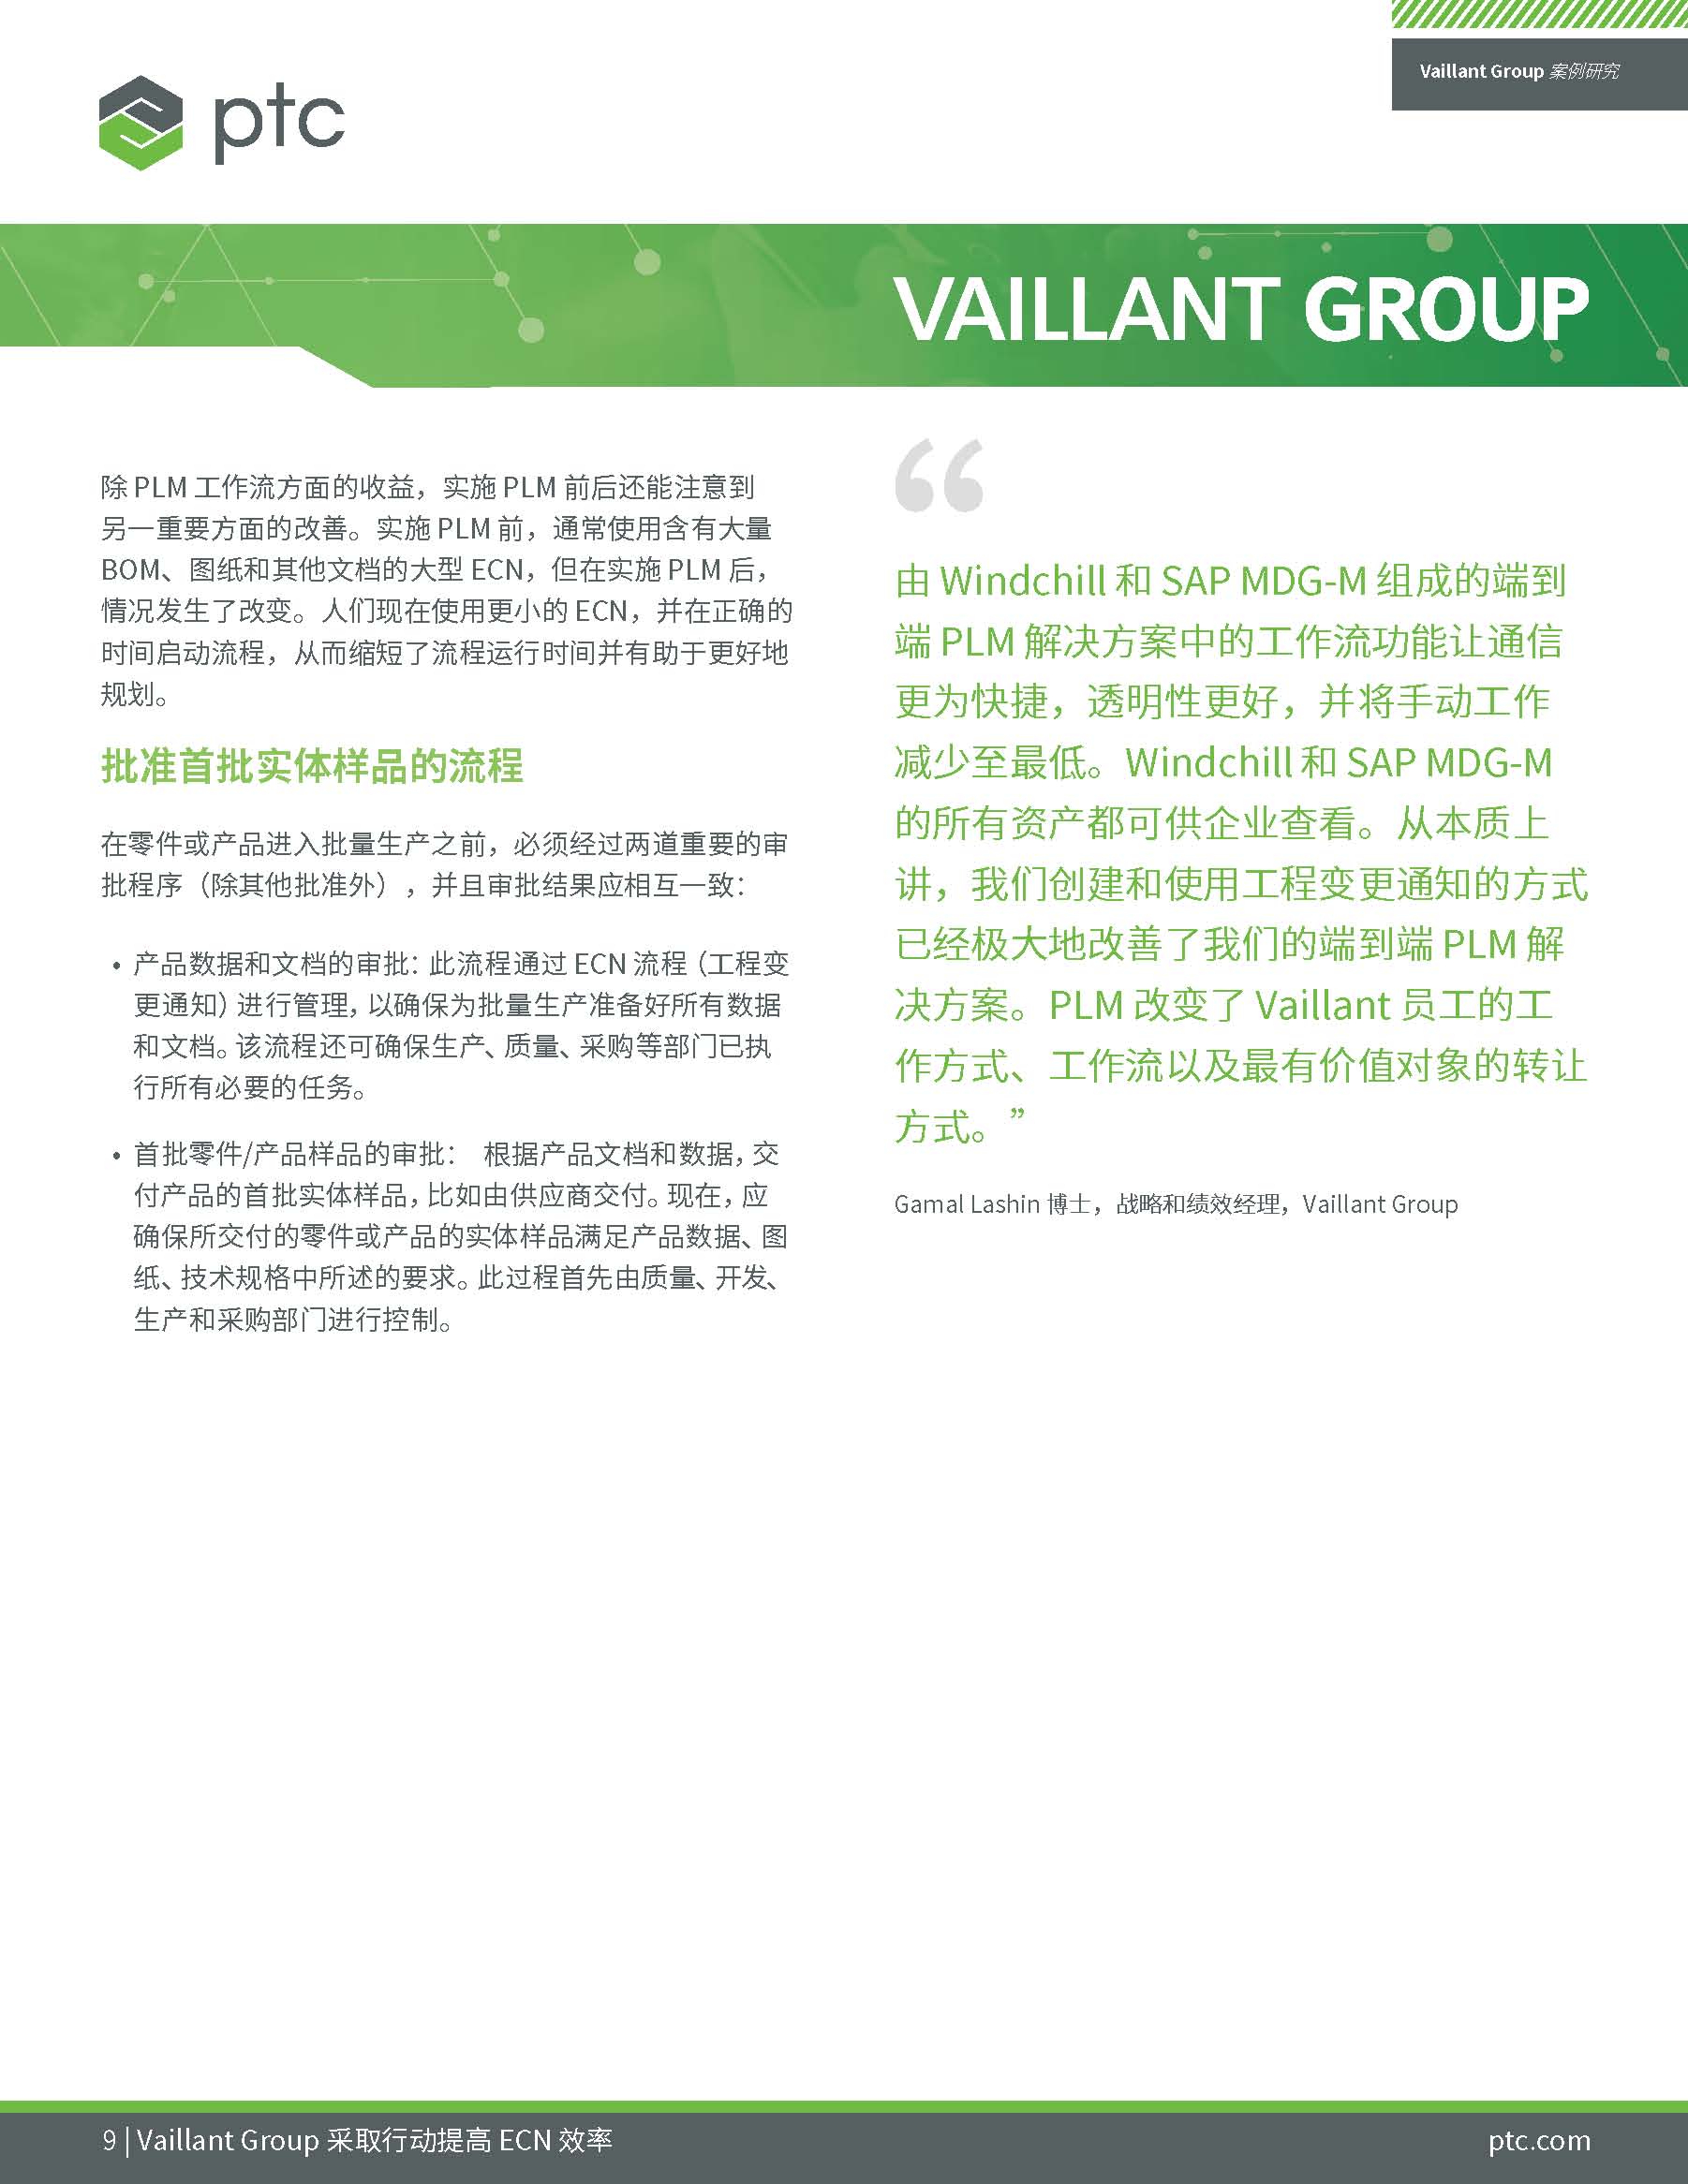 Vaillant Group's Digital Transformation (Chinese)_页面_09.jpg